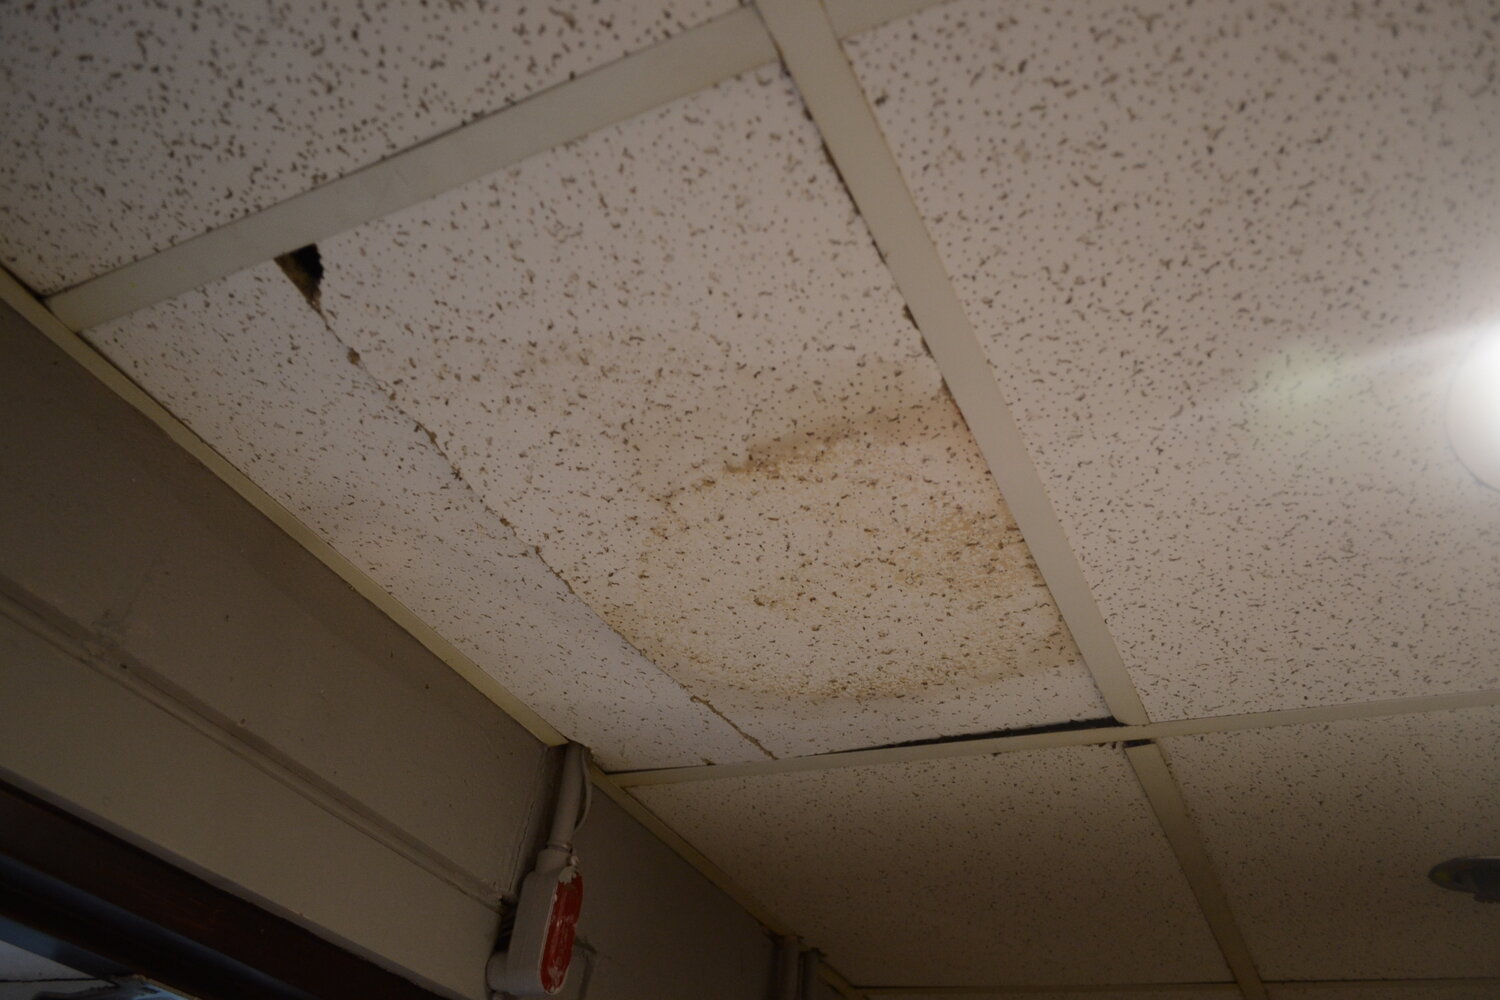 Water damage can be seen throughout the school along the ceiling.